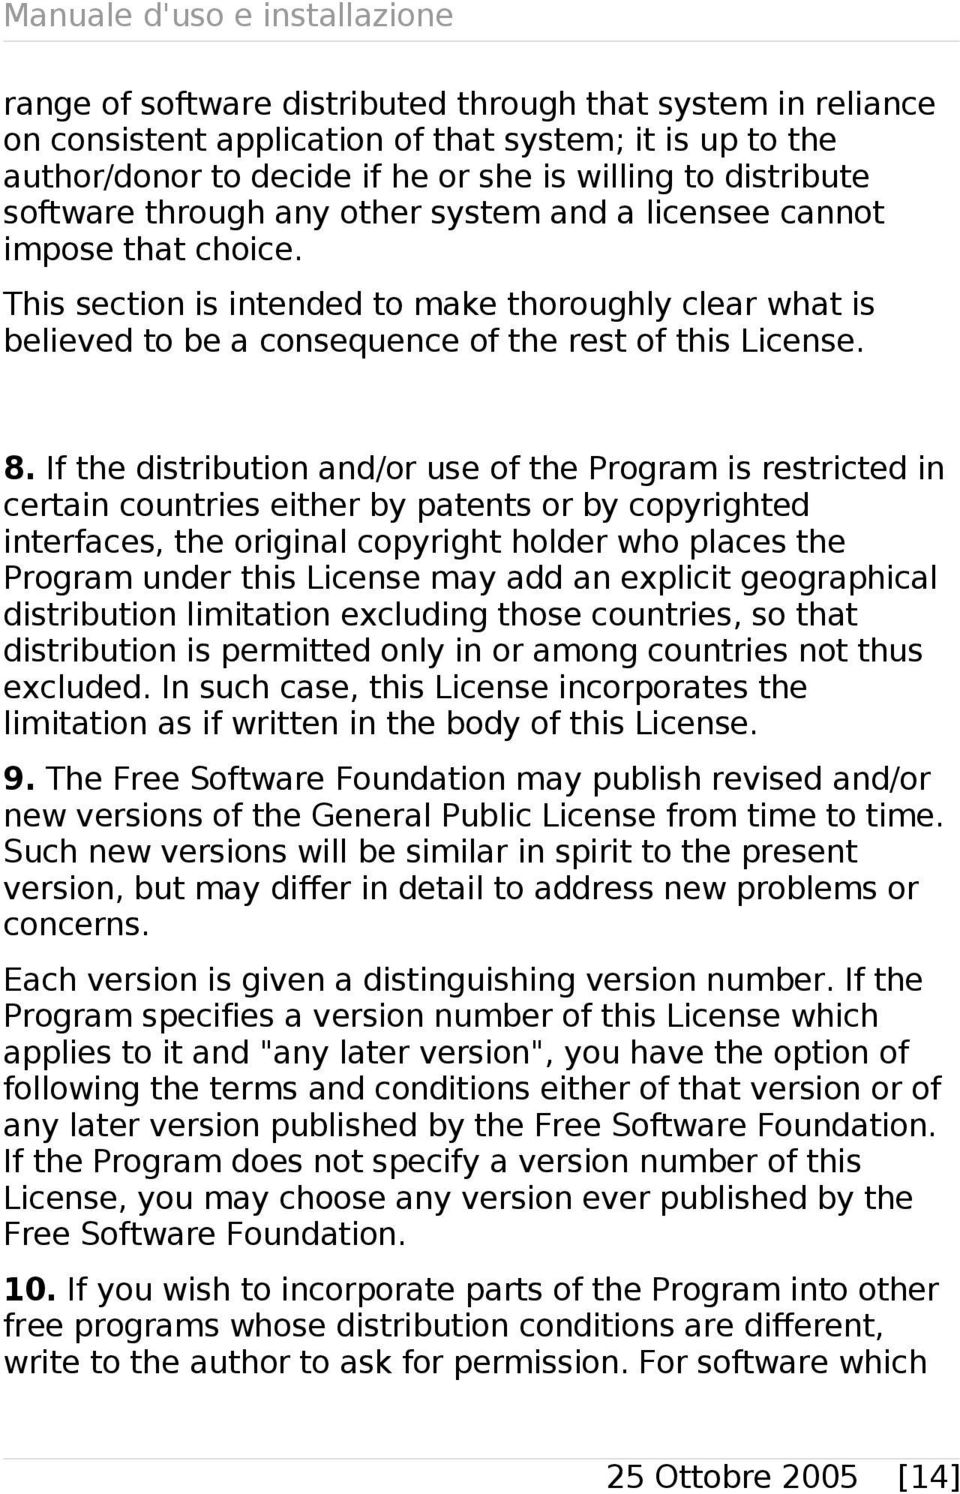 If the distribution and/or use of the Program is restricted in certain countries either by patents or by copyrighted interfaces, the original copyright holder who places the Program under this